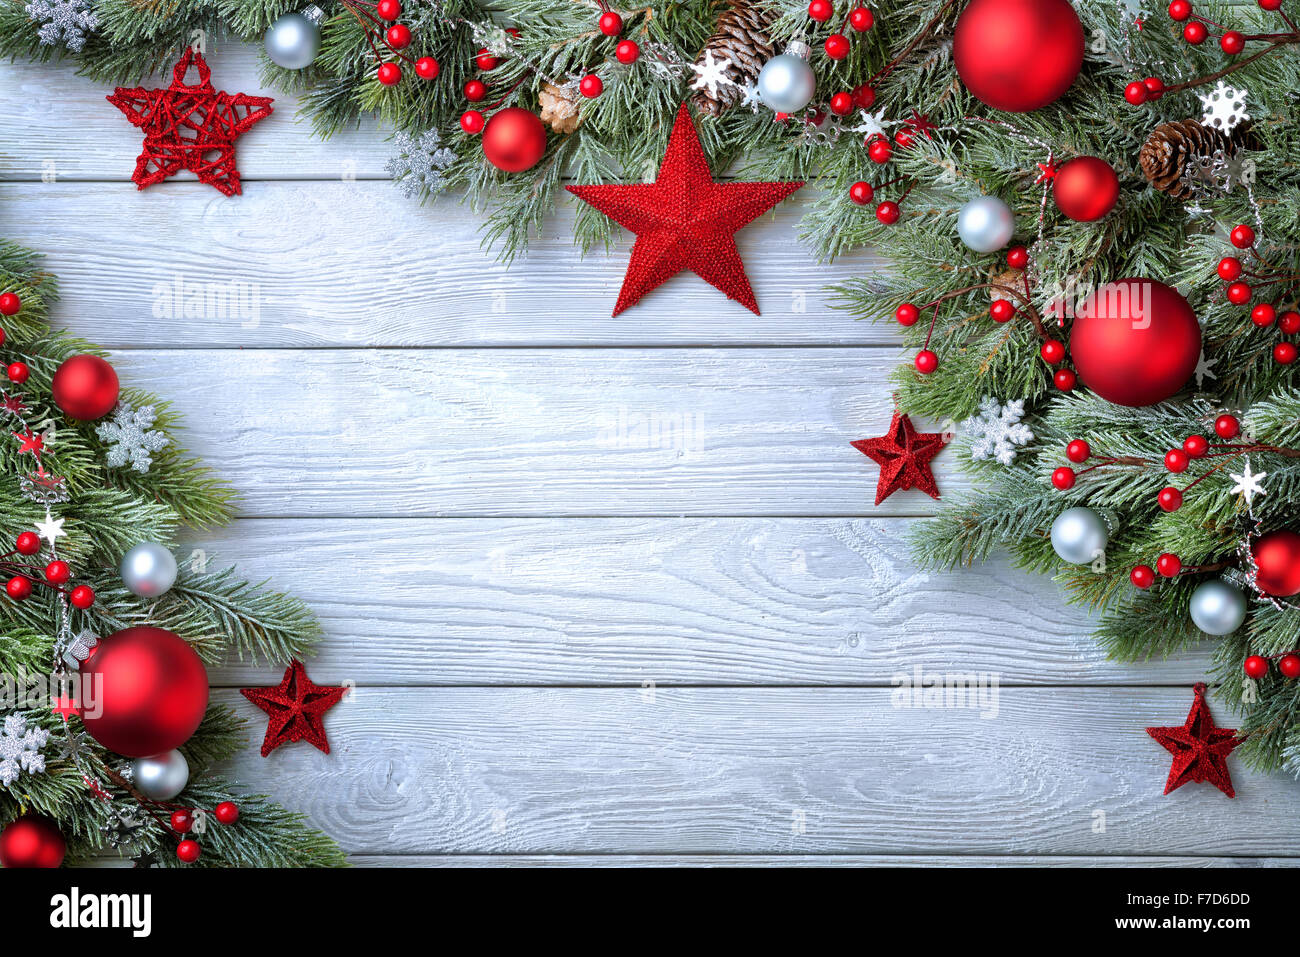 Christmas background with blue wooden board and fir branches decorated with red and silver baubles and stars - modern, simple an Stock Photo